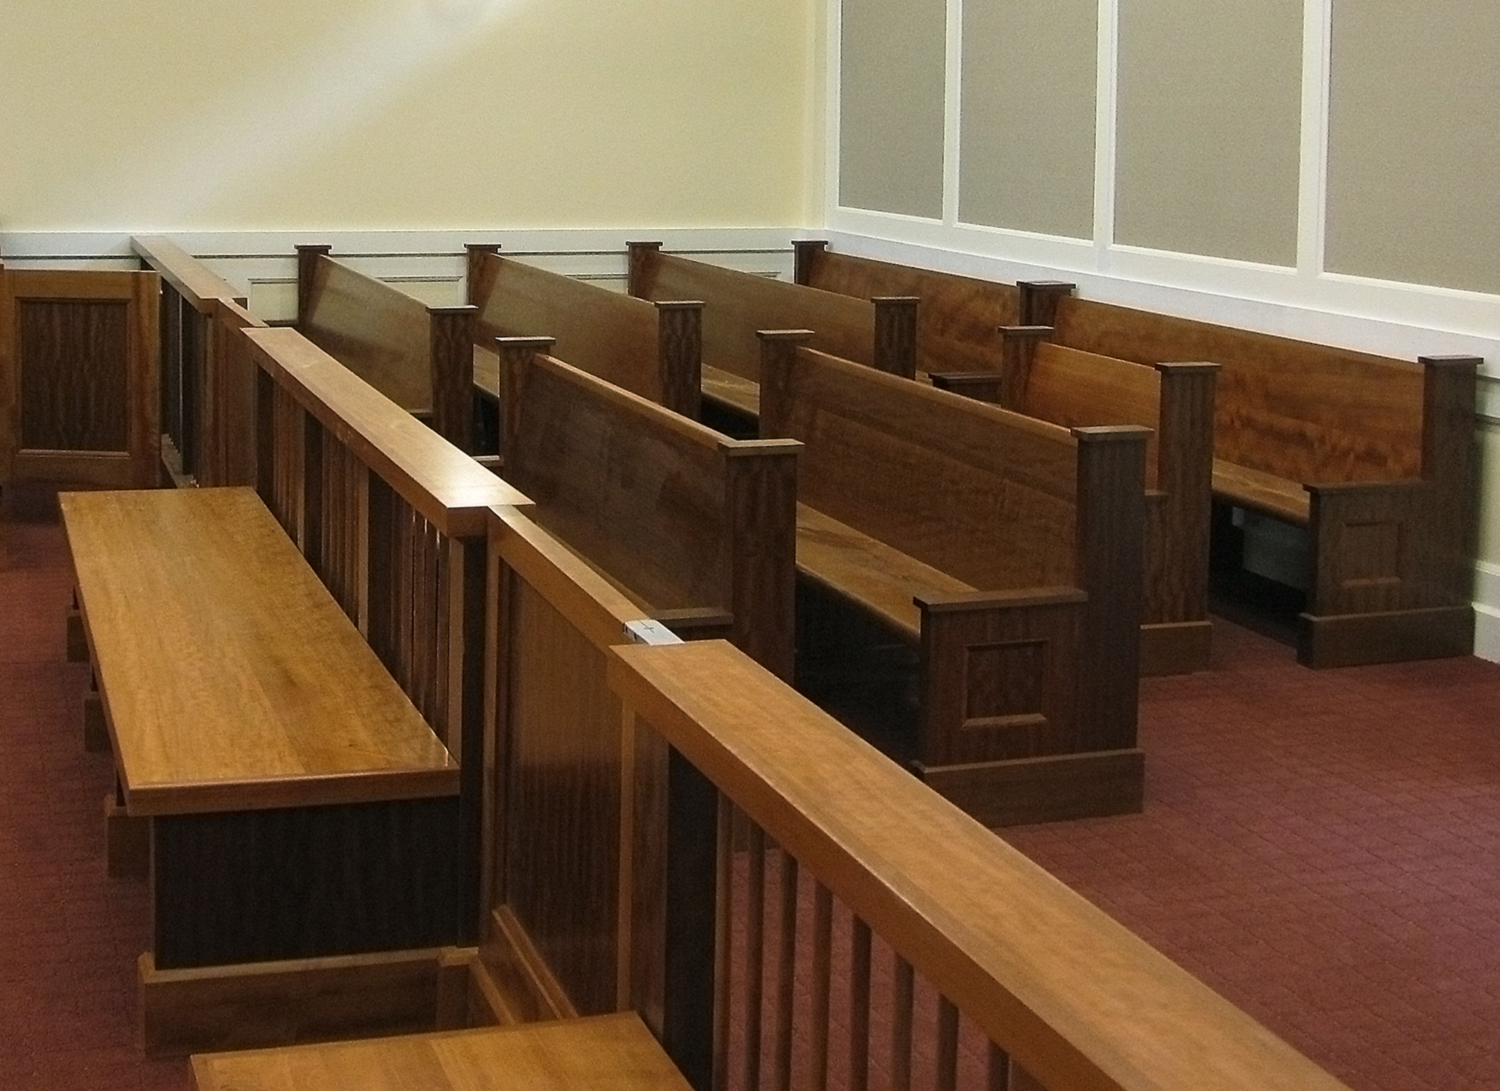 All Wood Benches inside Kent County Courts - Dover, DE